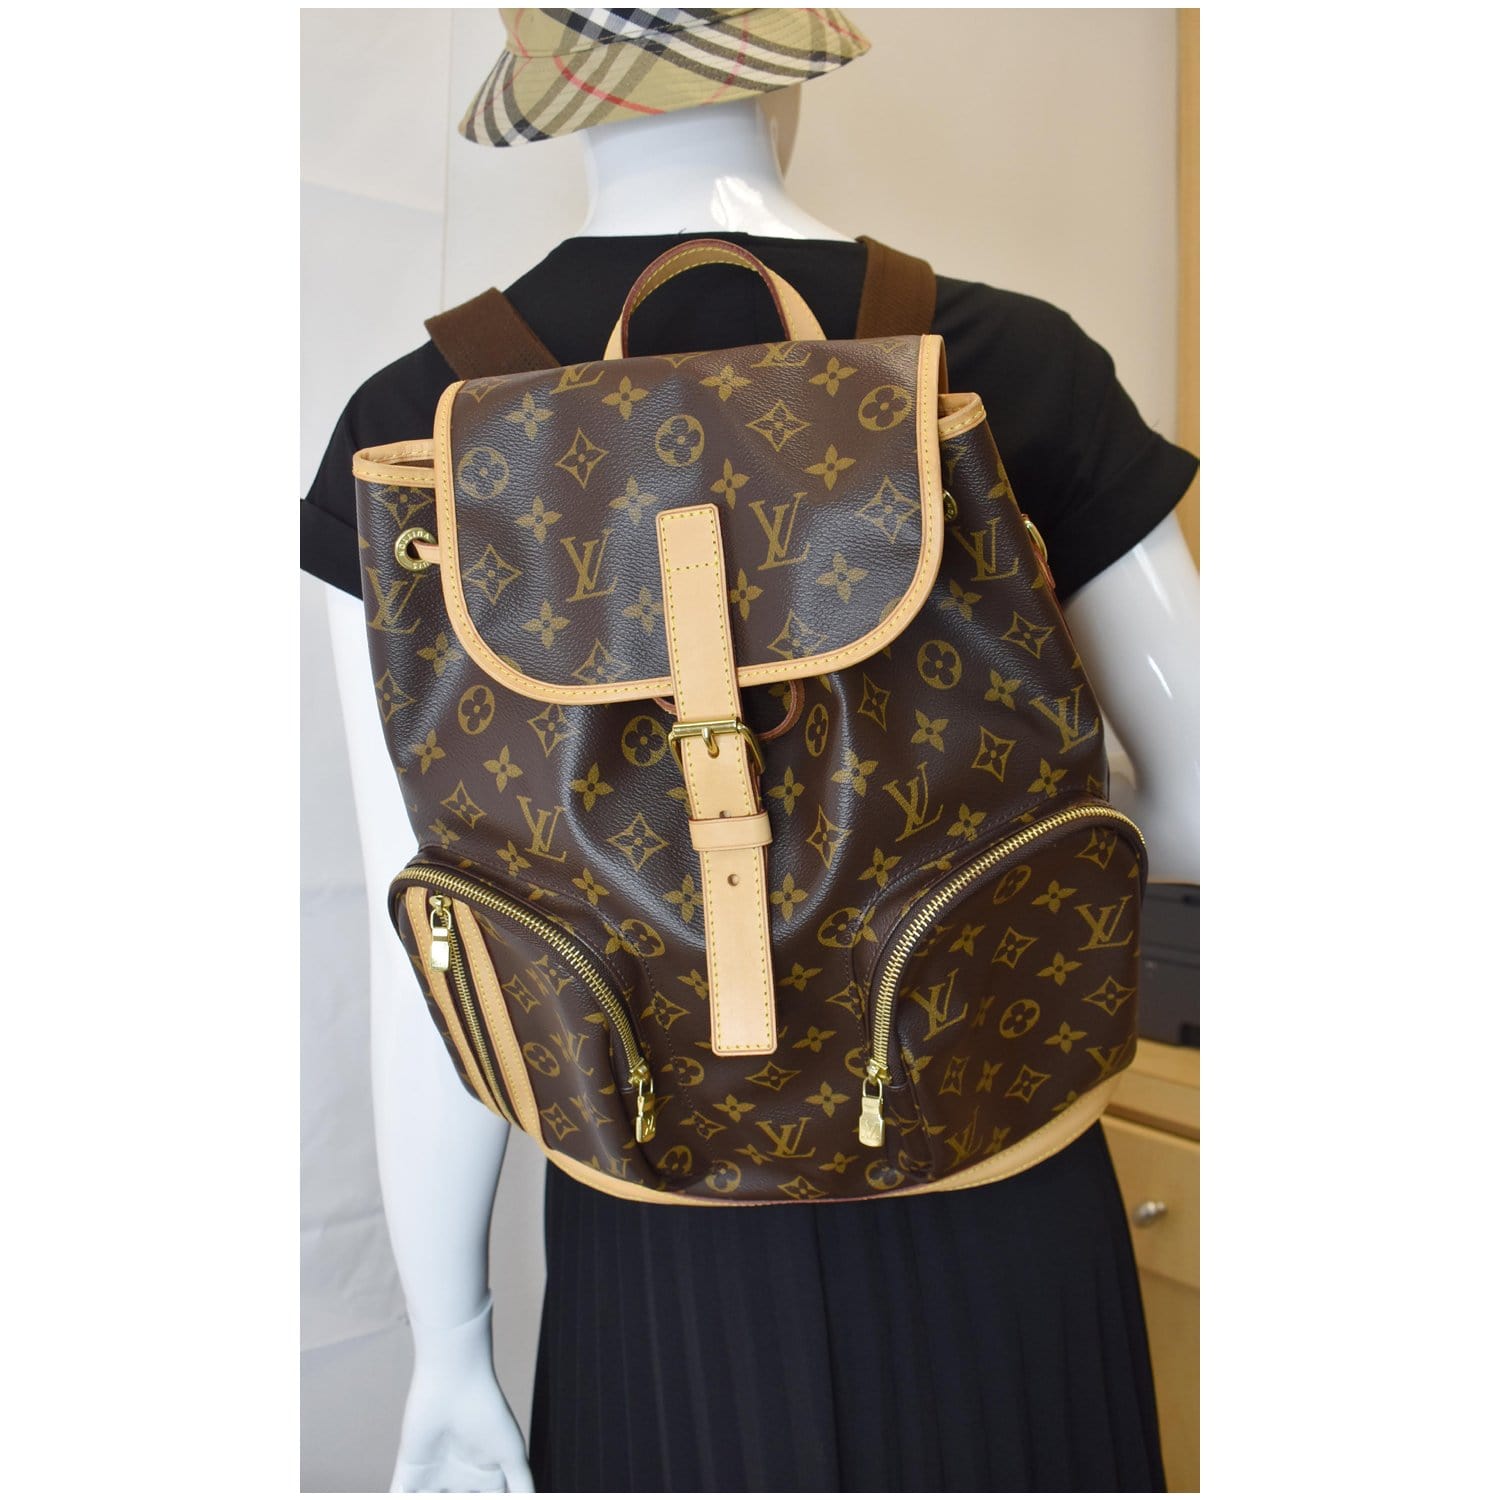 Backpacks Louis Vuitton Bosphore Backpack in New Conditions